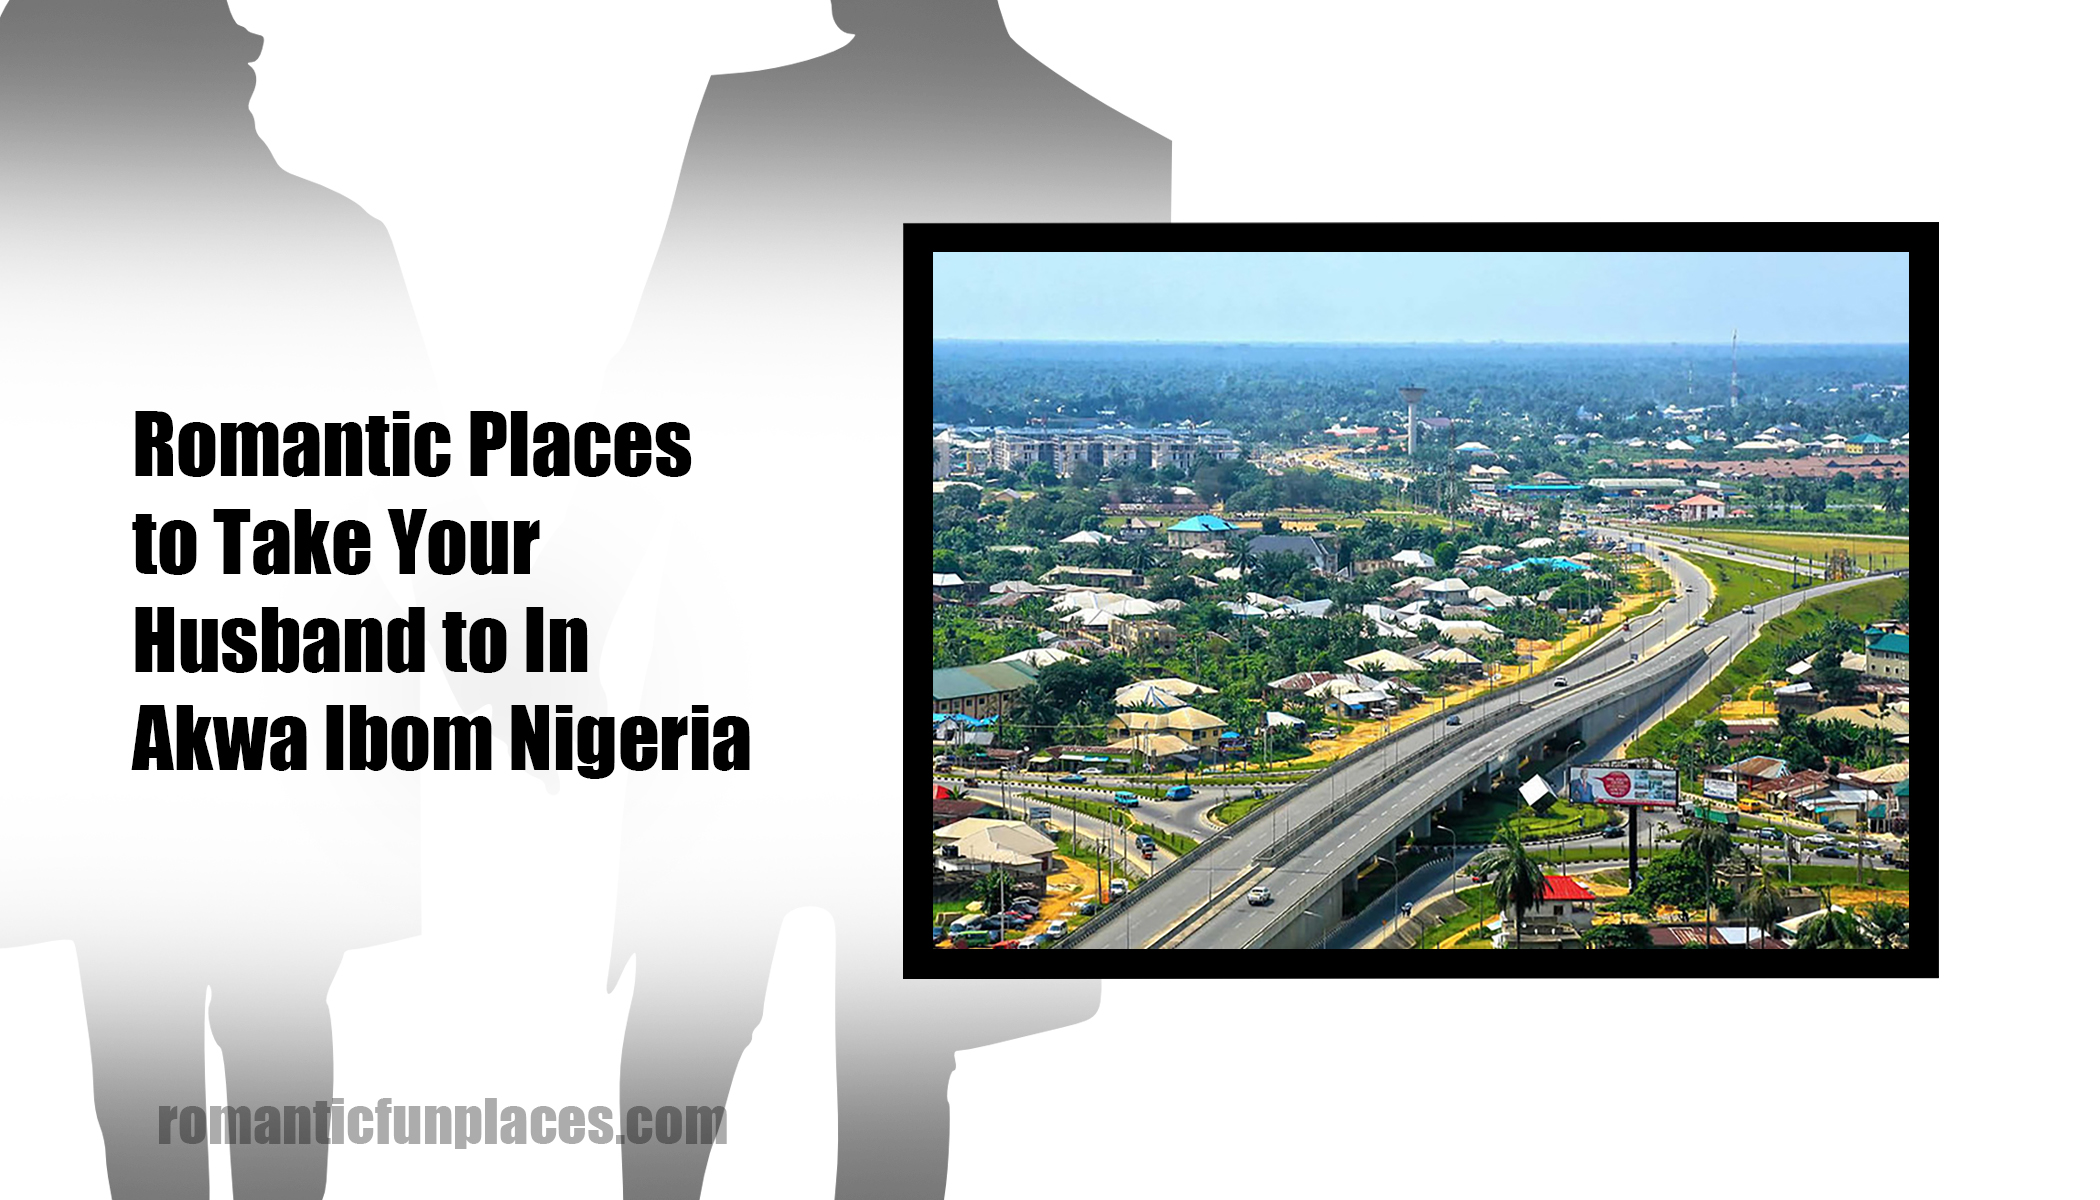 Romantic Places to Take Your Husband to In Akwa Ibom Nigeria